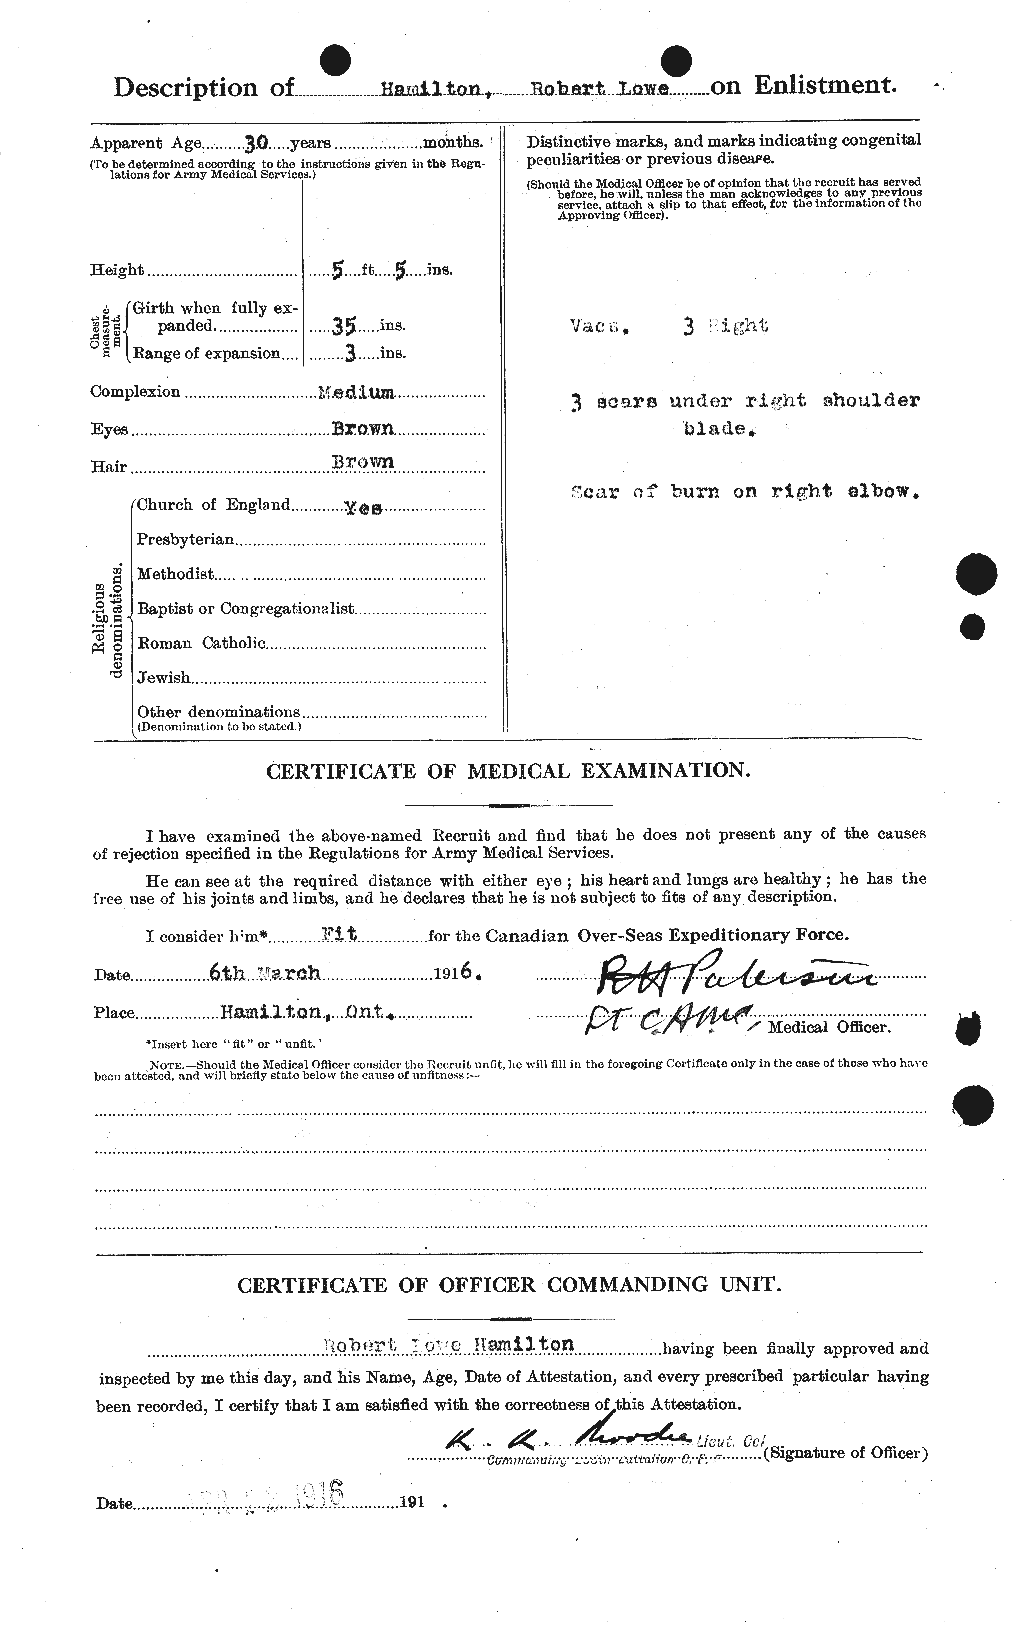 Personnel Records of the First World War - CEF 373266b